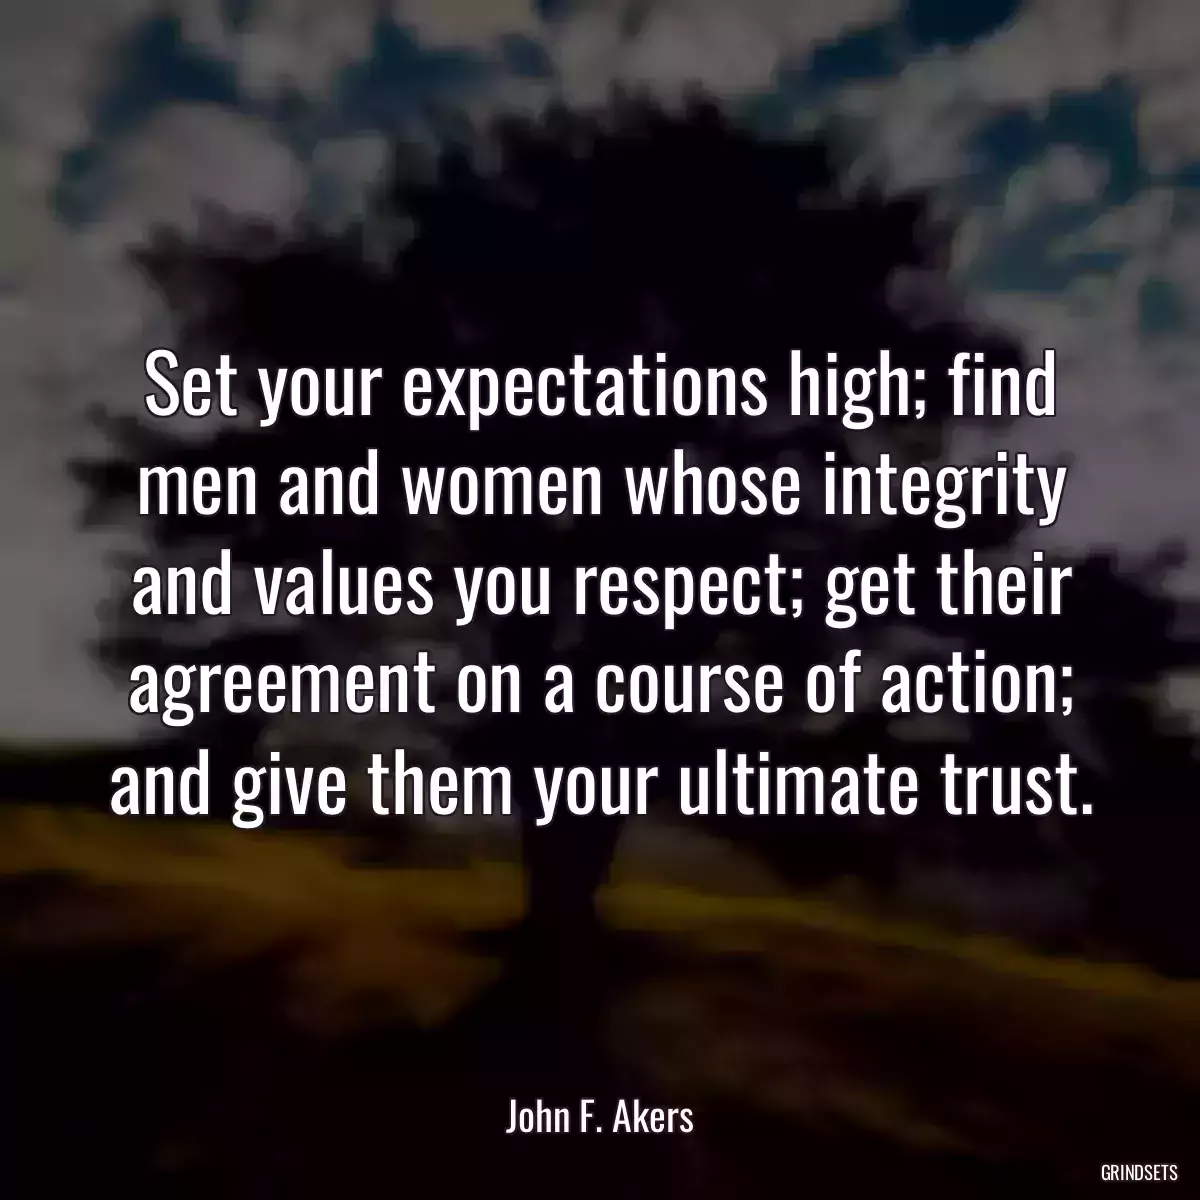 Set your expectations high; find men and women whose integrity and values you respect; get their agreement on a course of action; and give them your ultimate trust.